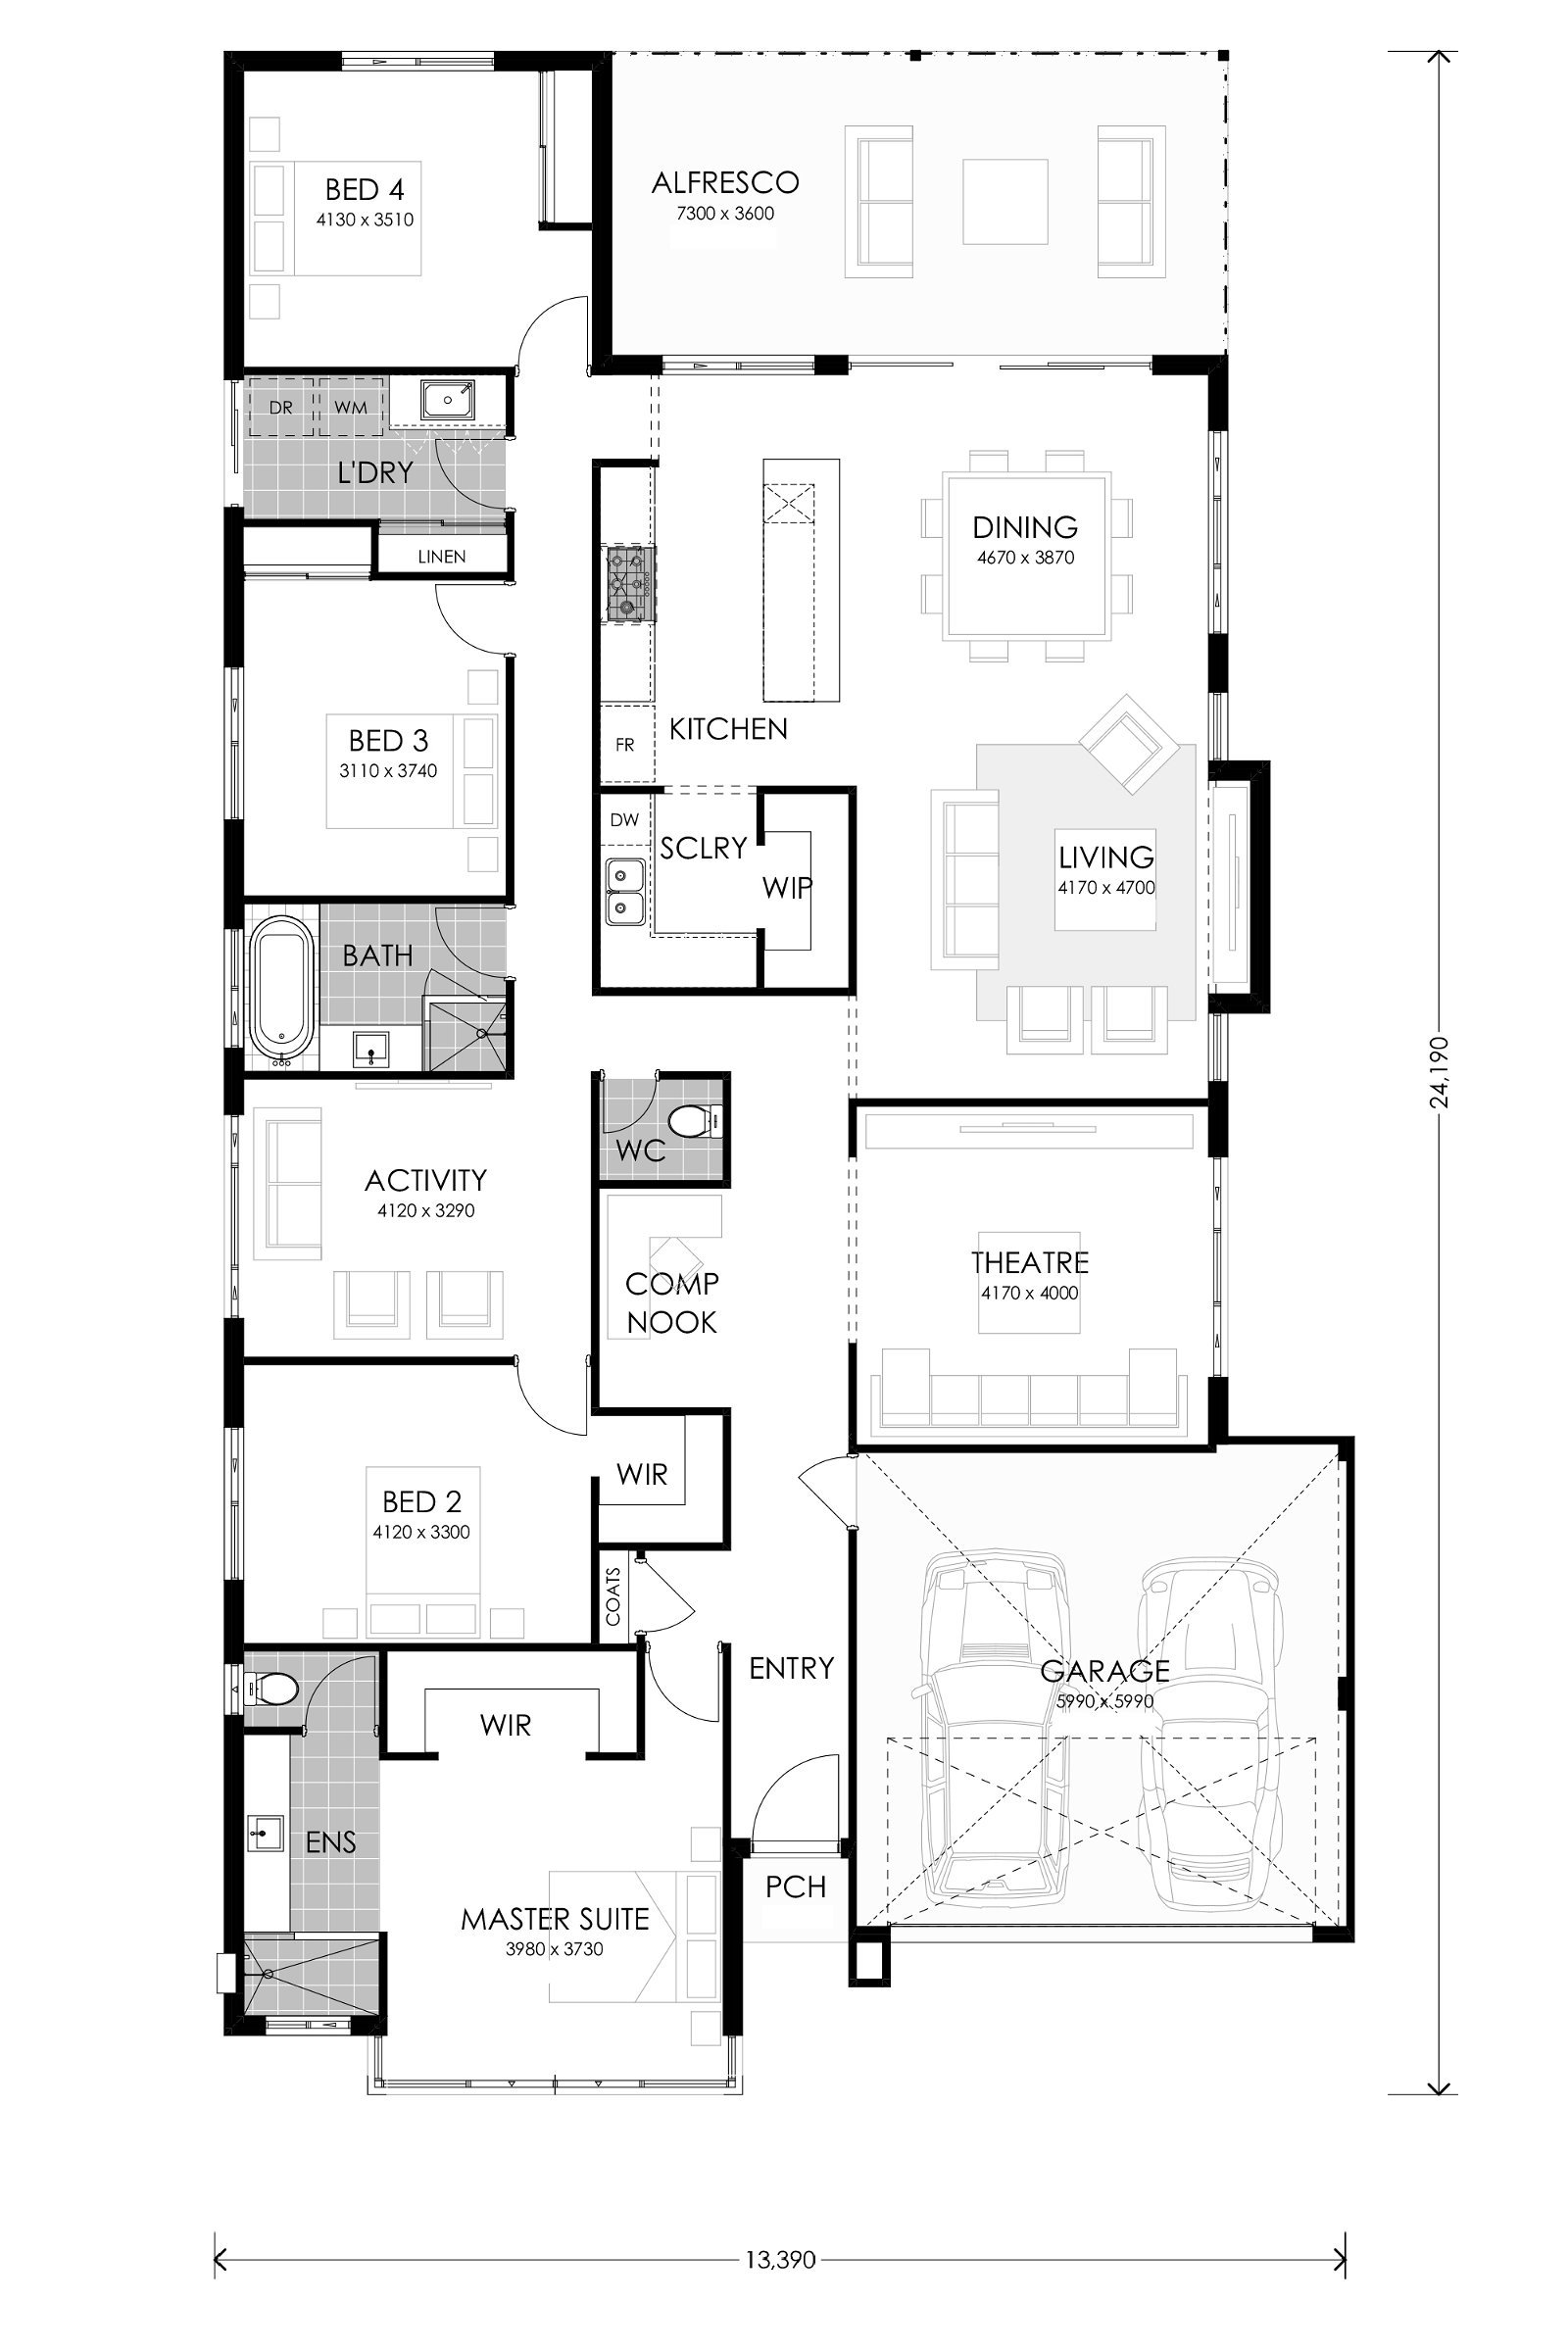 Residential Attitudes - Social Butterfly - Floorplan - Social Butterfly Floorplan Website